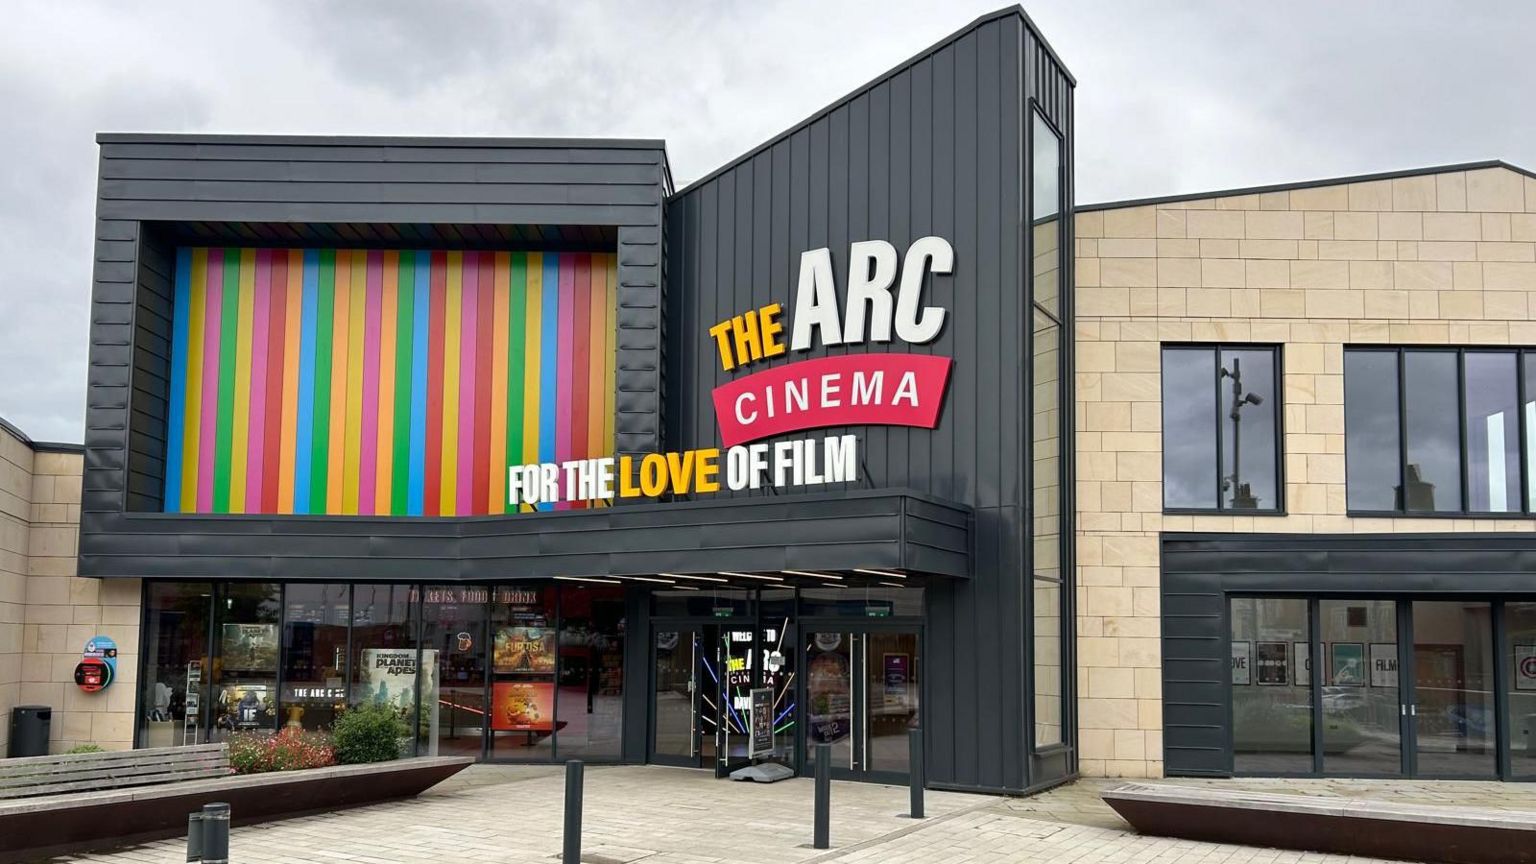 Entrance to The Arc Cinema in Daventry